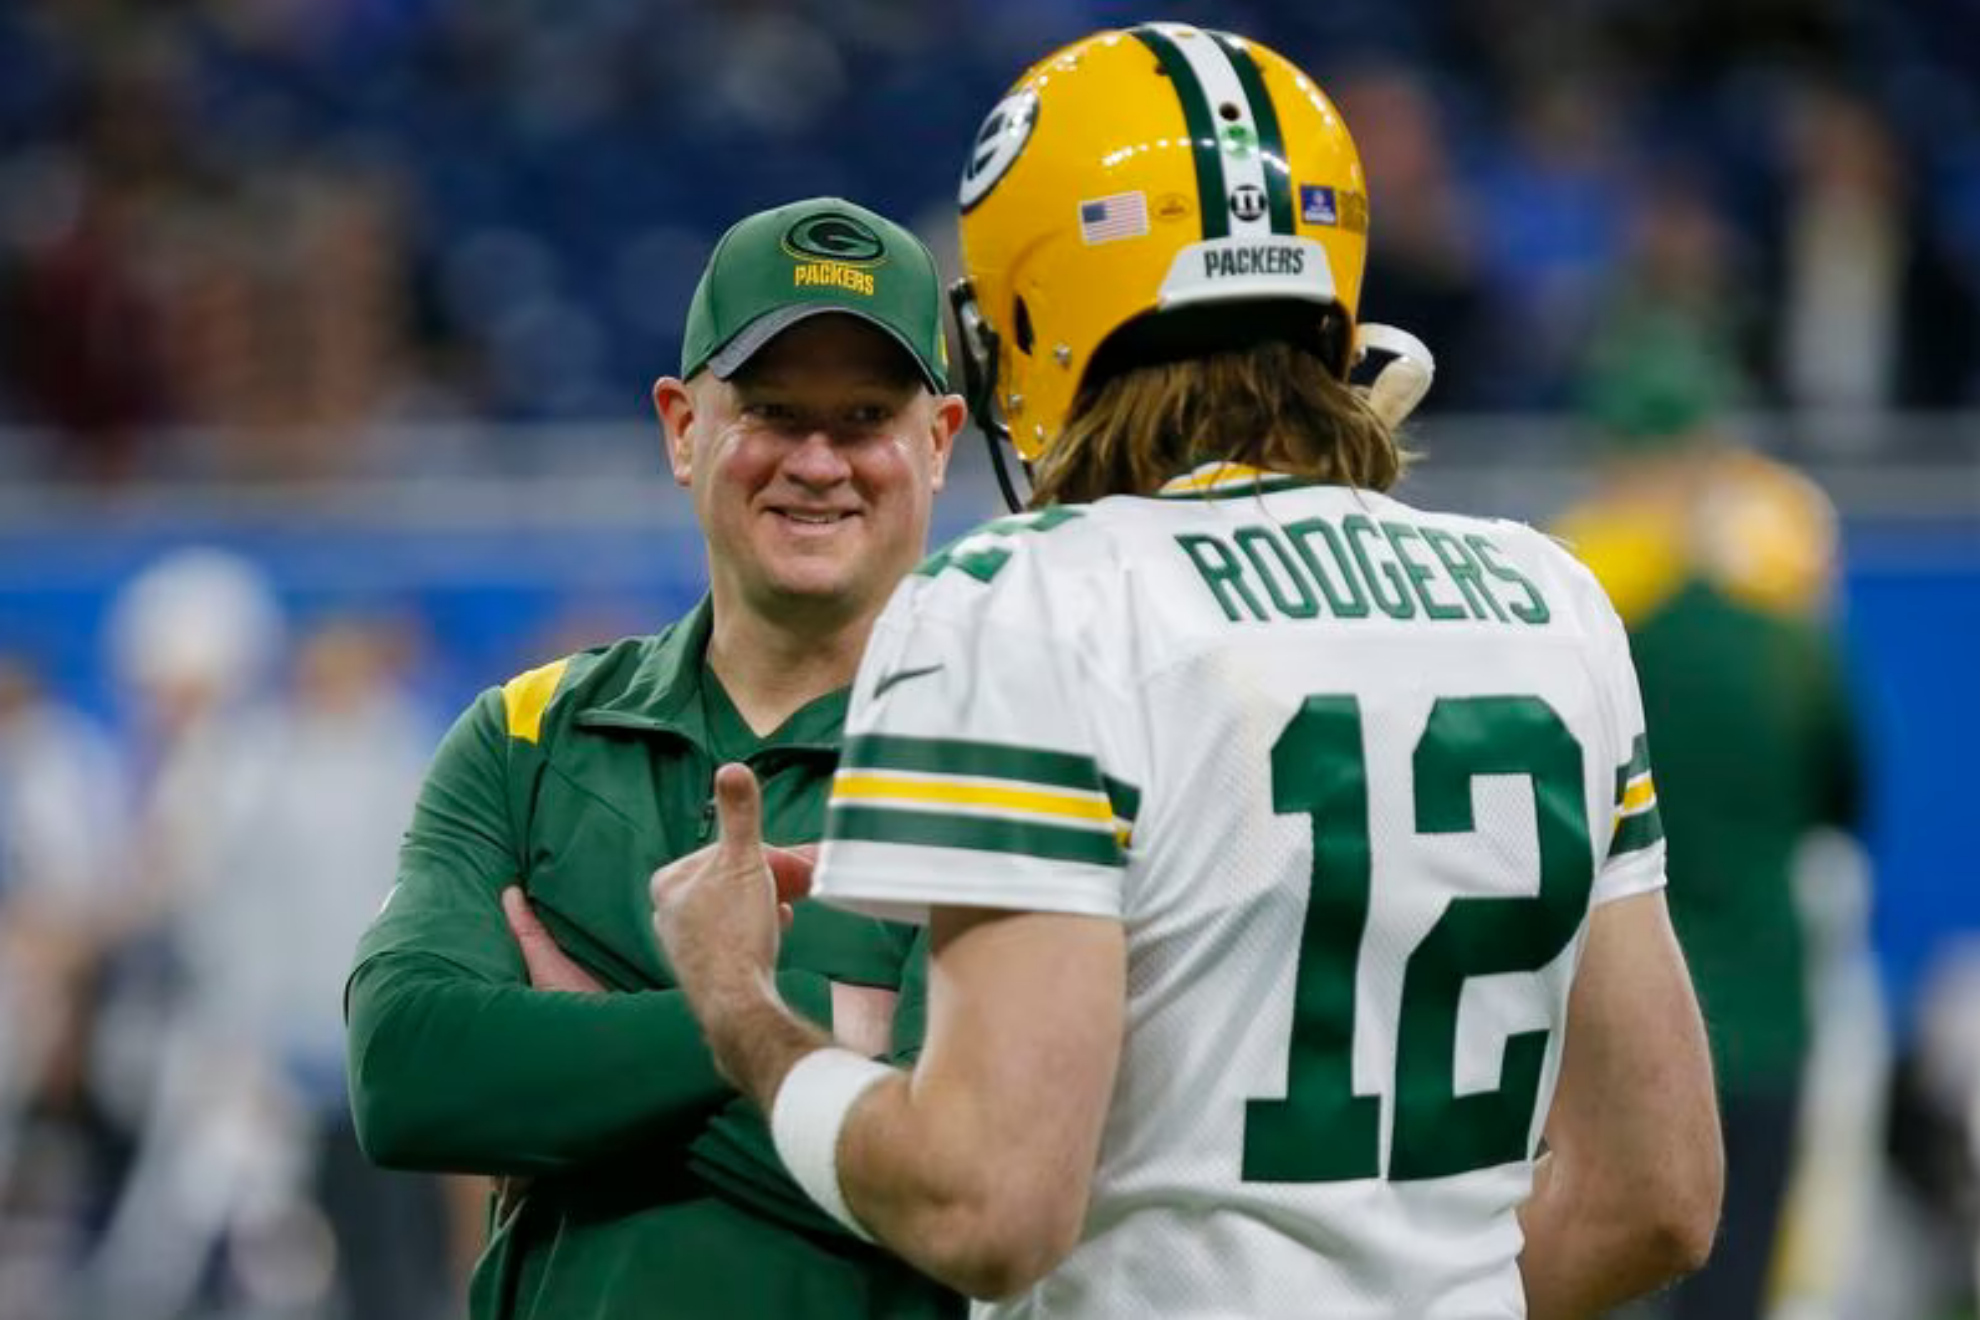 Nathaniel Hackett and Aaron Rodgers have a history working together in the Green Bay Packers.